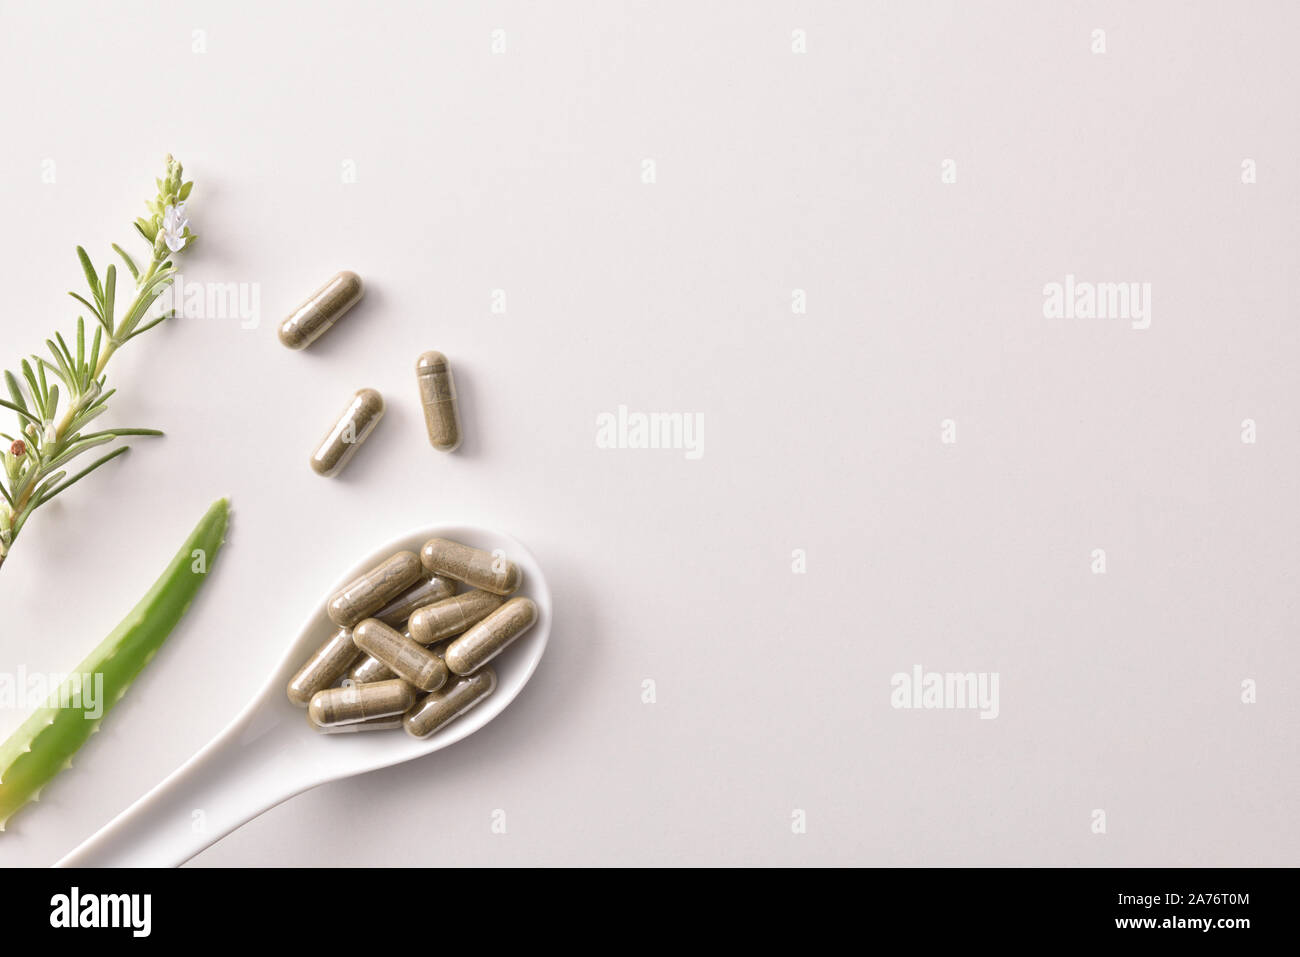 Background with capsules of natural medicine on a ceramic spoon and rosemary and aloe vera on white table. Top view. Horizontal composition. Stock Photo